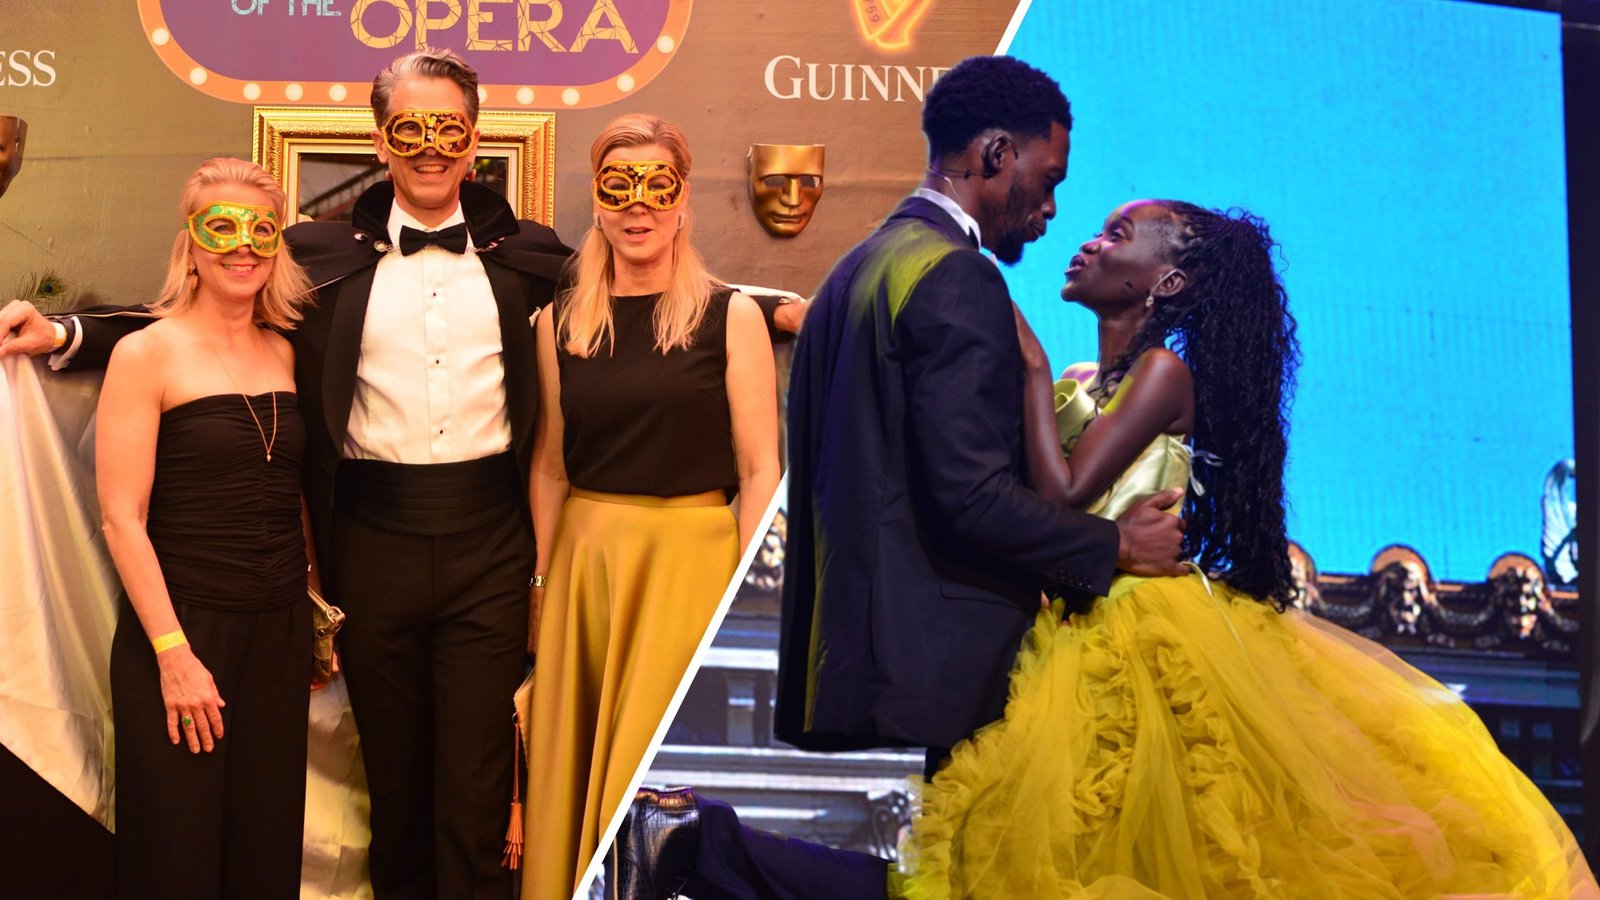 guinness-bright-house-shines-with-historic-all-black-cast-performance-of-‘phantom-of-the-opera’